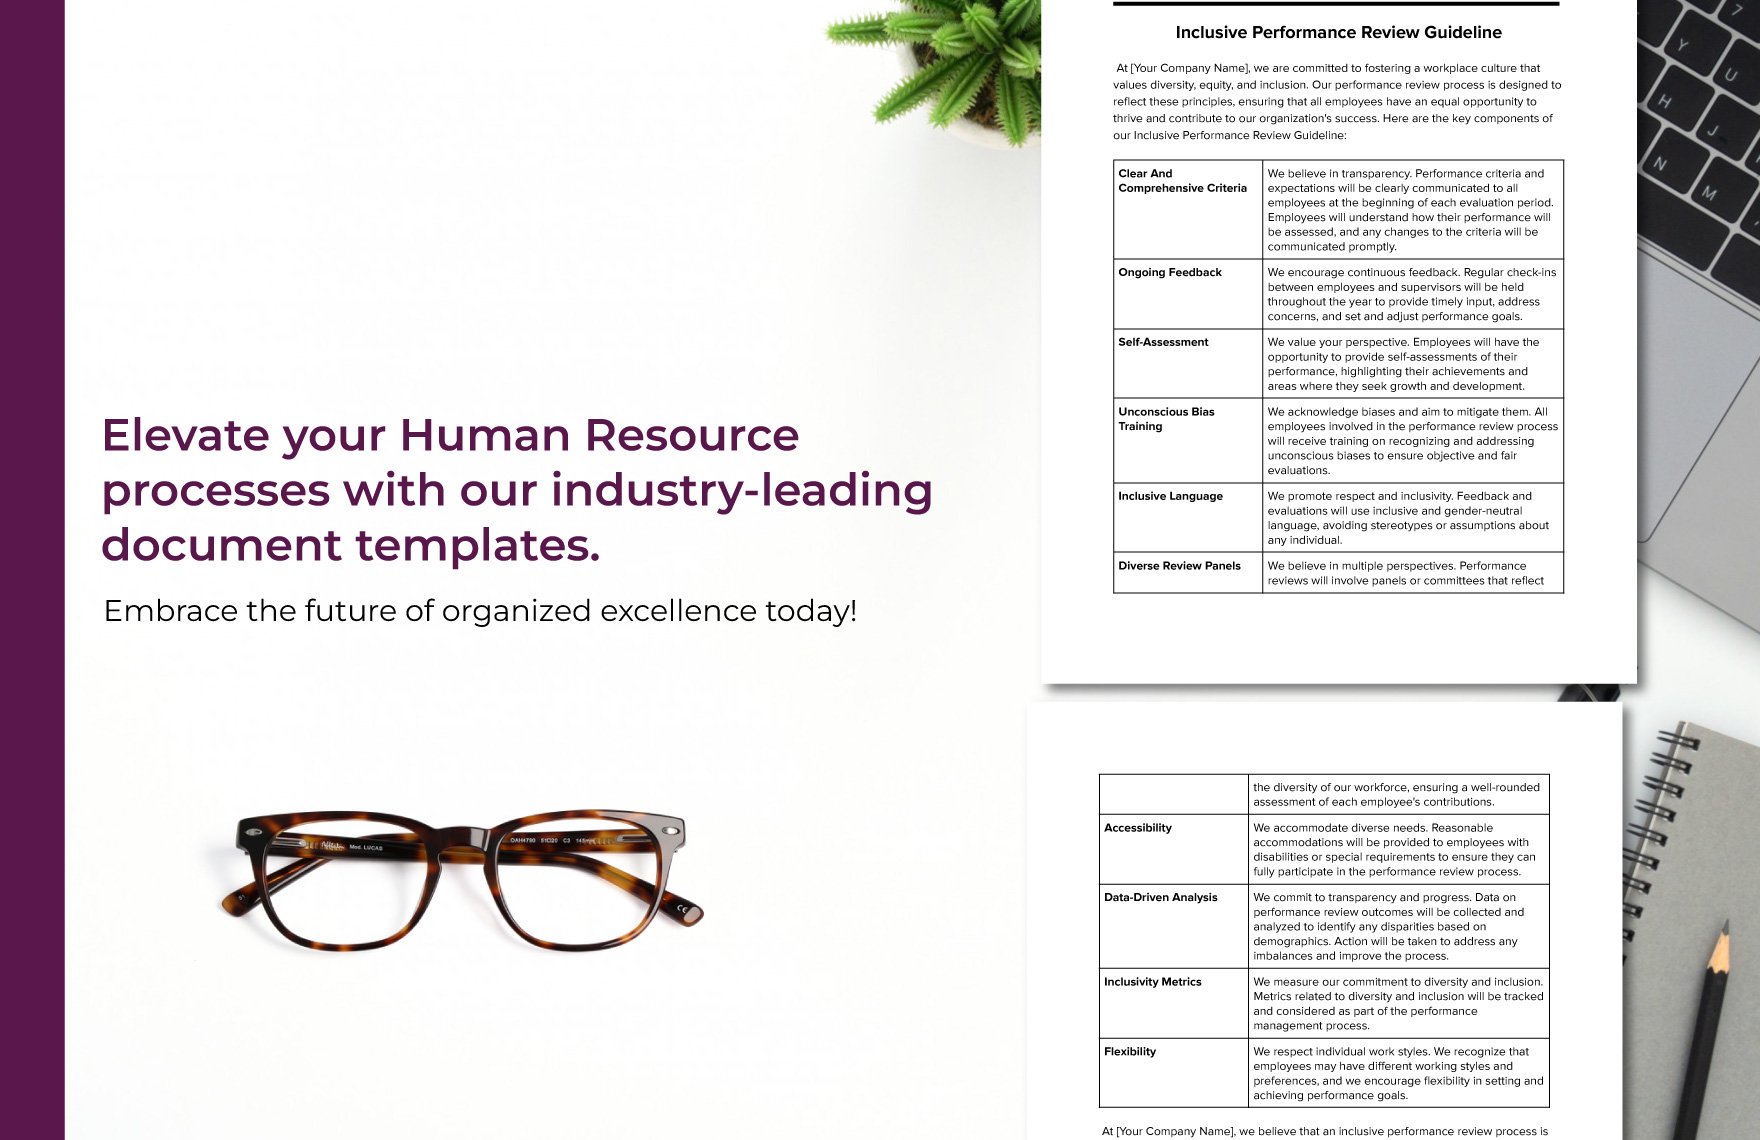 Inclusive Performance Review Guideline HR Template